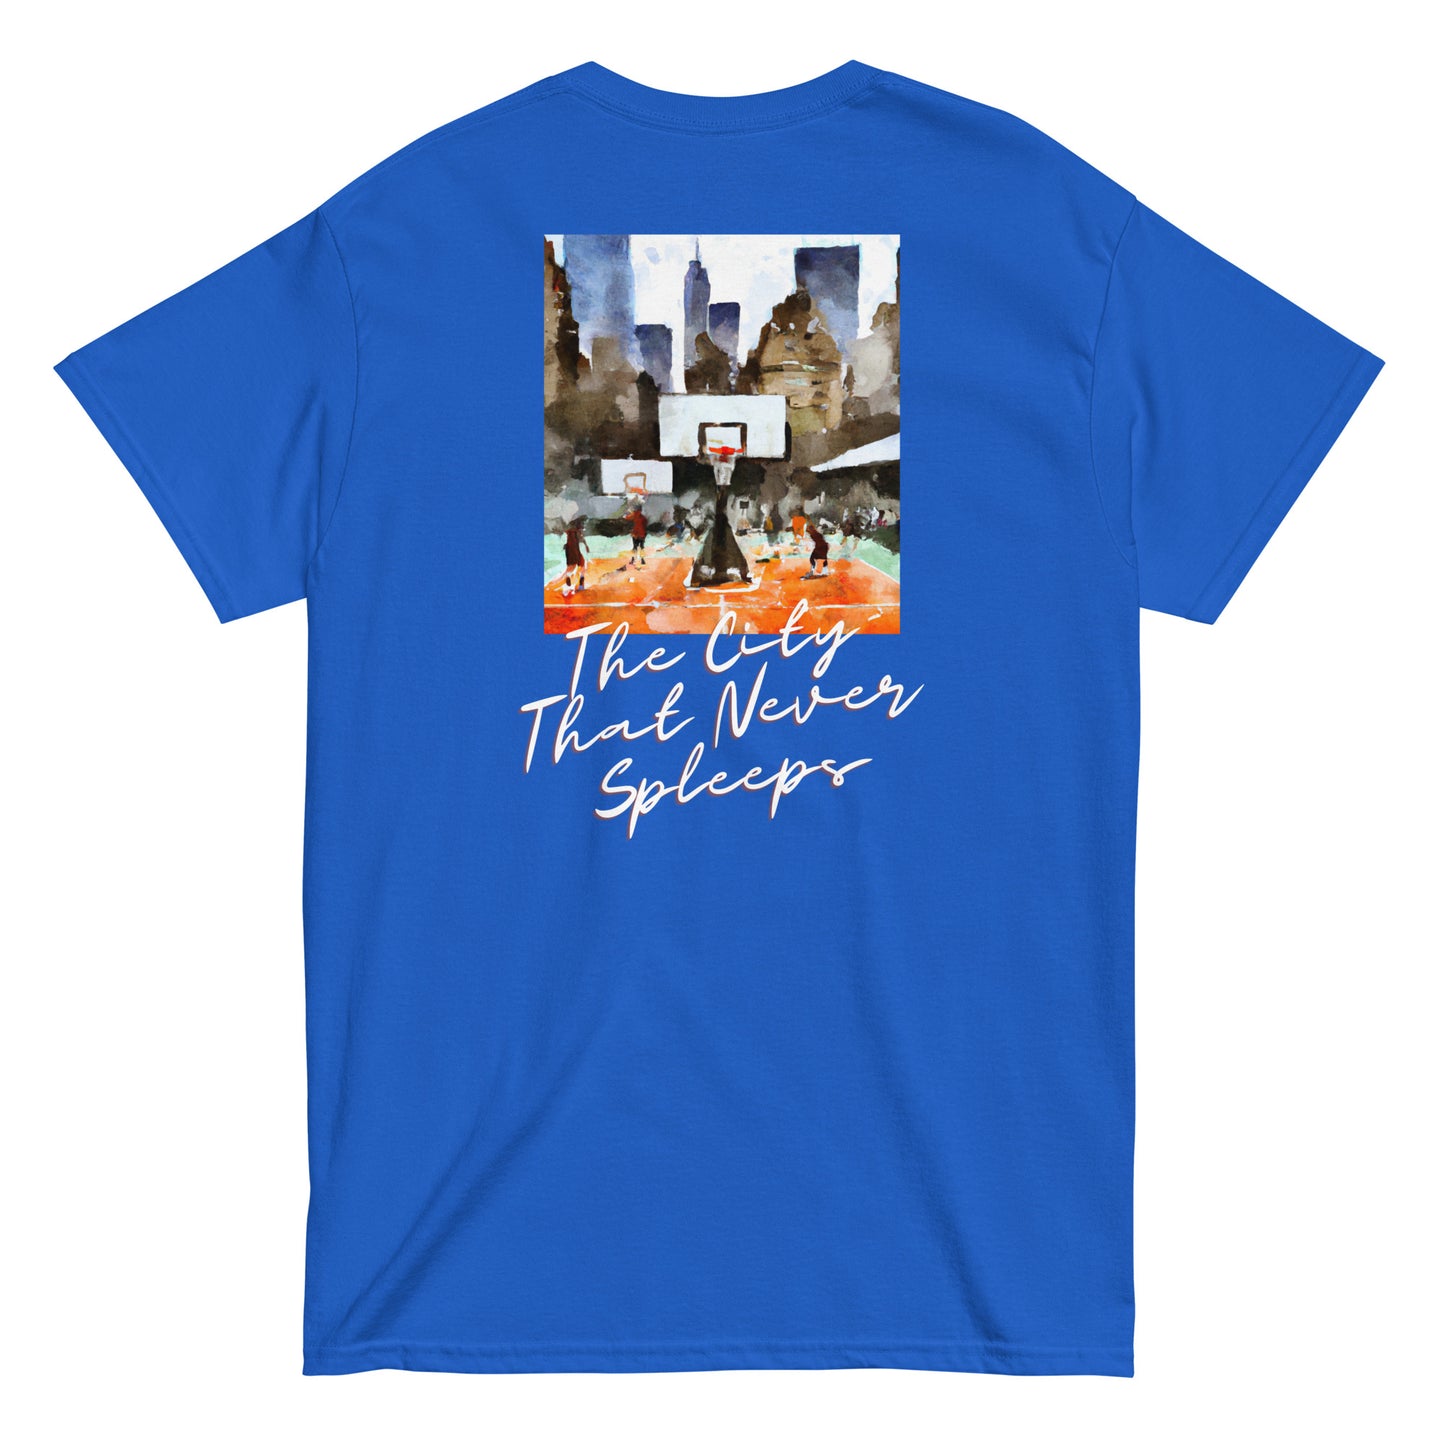 “The City That Never Sleeps” Embroidered T-shirt - Blue